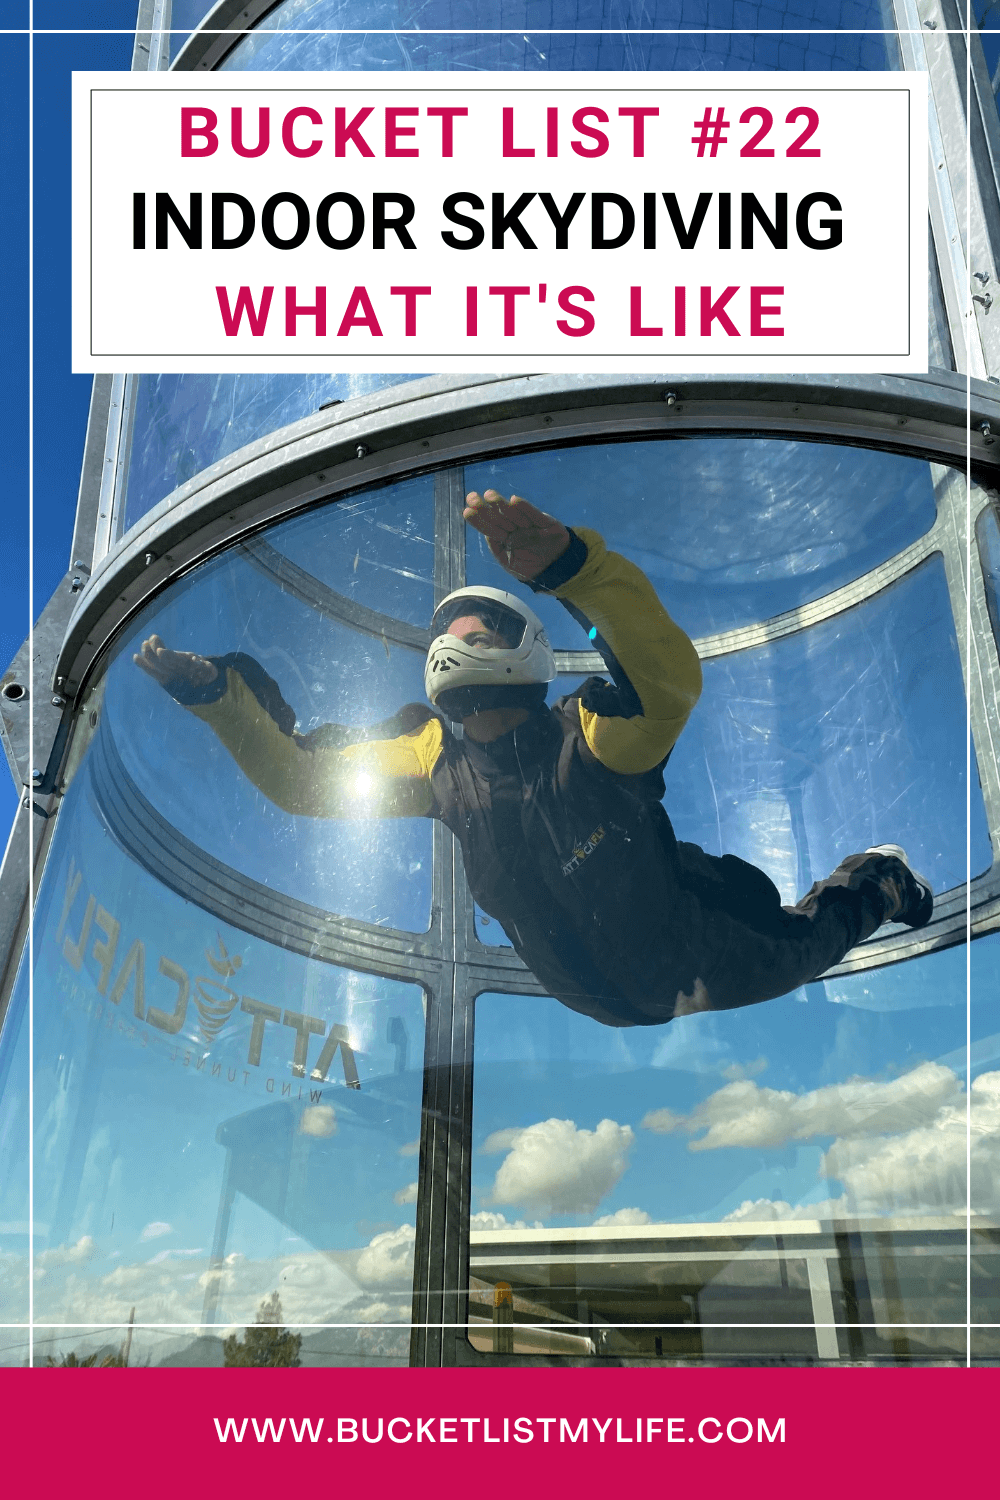 Indoor Skydiving Near Athens: a Bucket List Activity